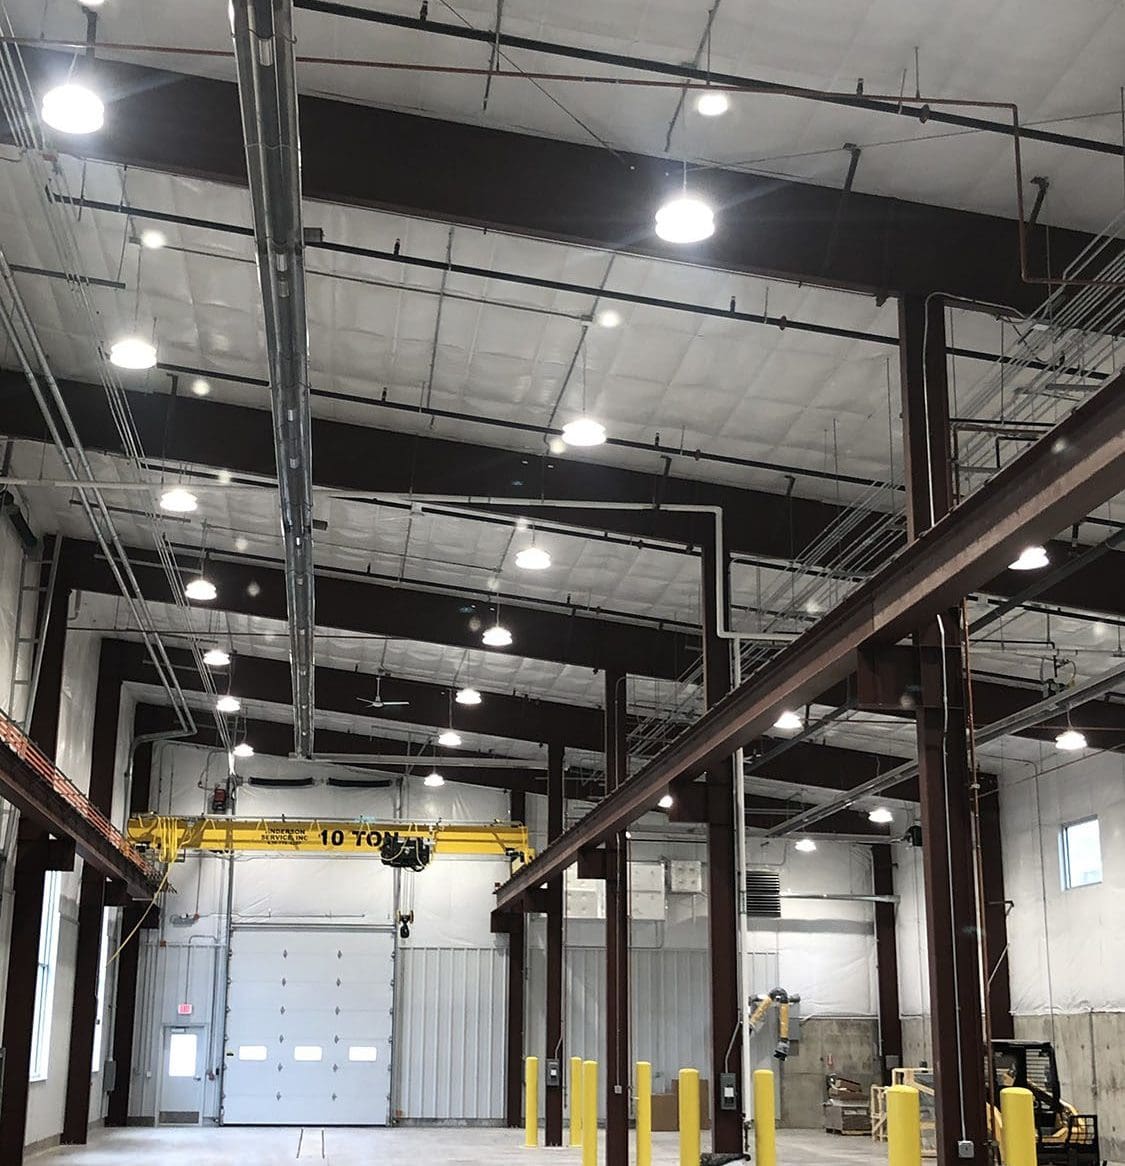 Commercial Electrical Service project of Interior SURF Maintenance Facility by Kilowatt Electric in Lead, SD.